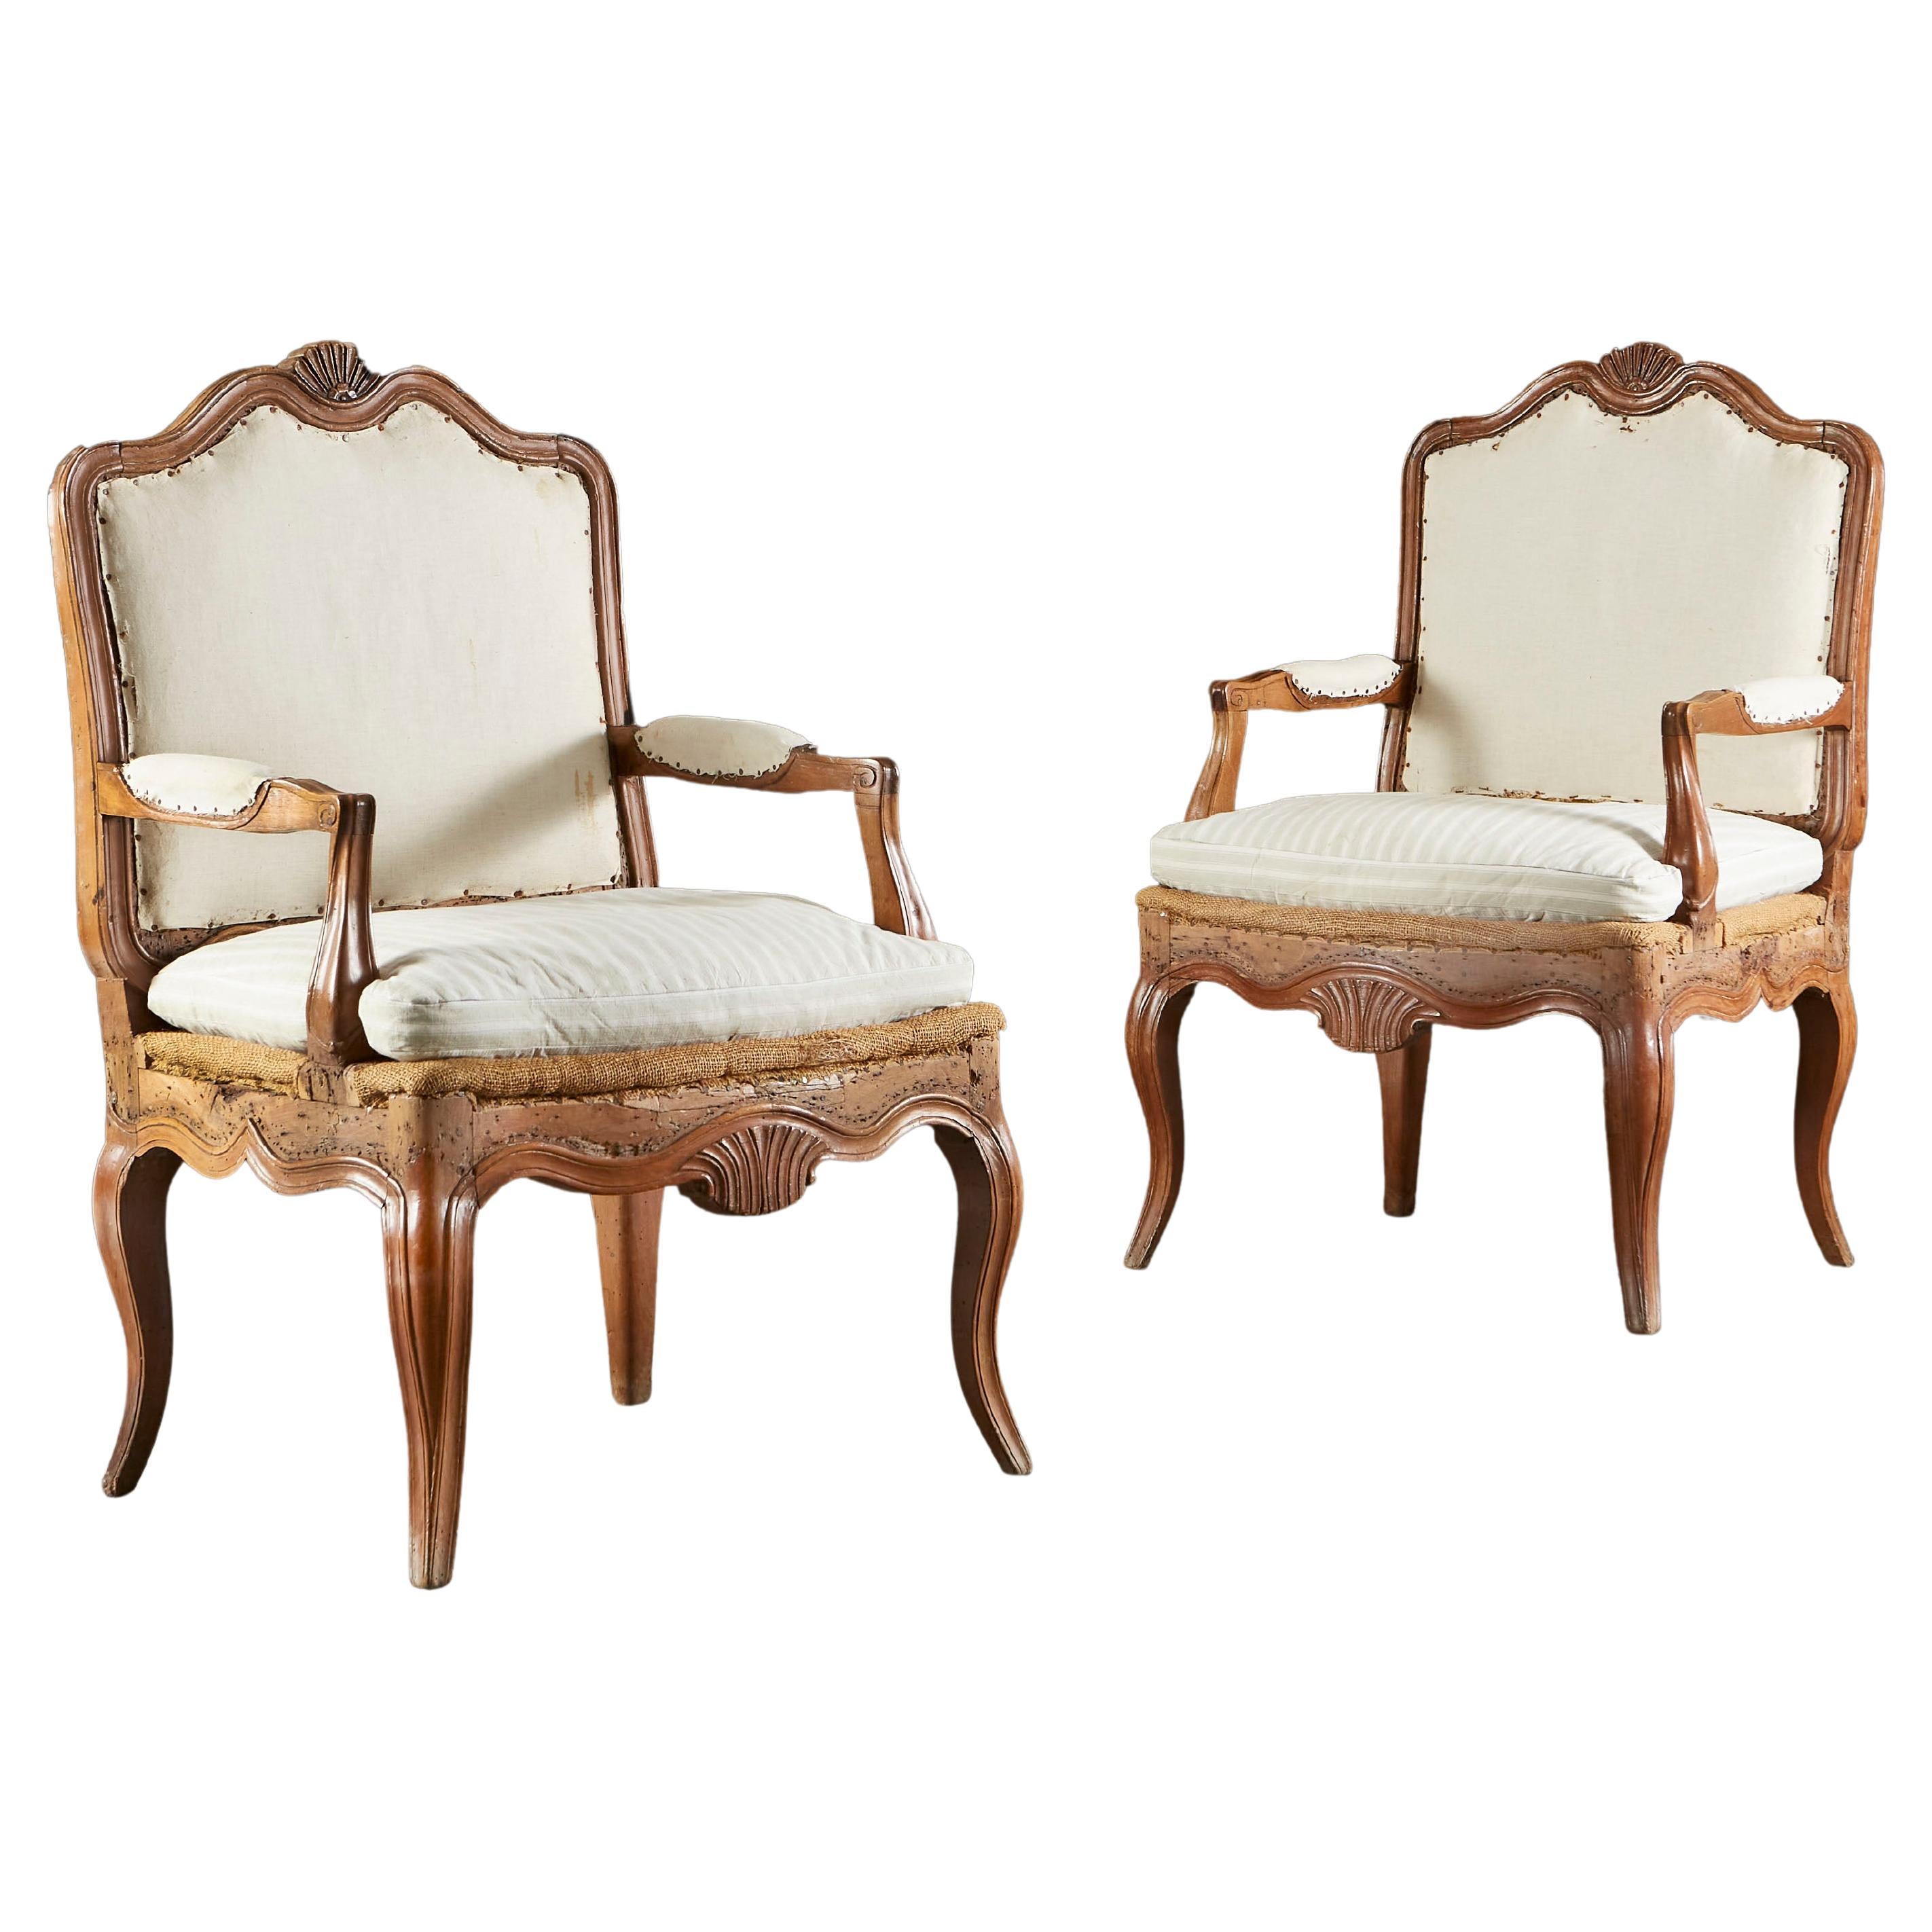 Pair of Early 19th Century French Open Armchairs For Sale